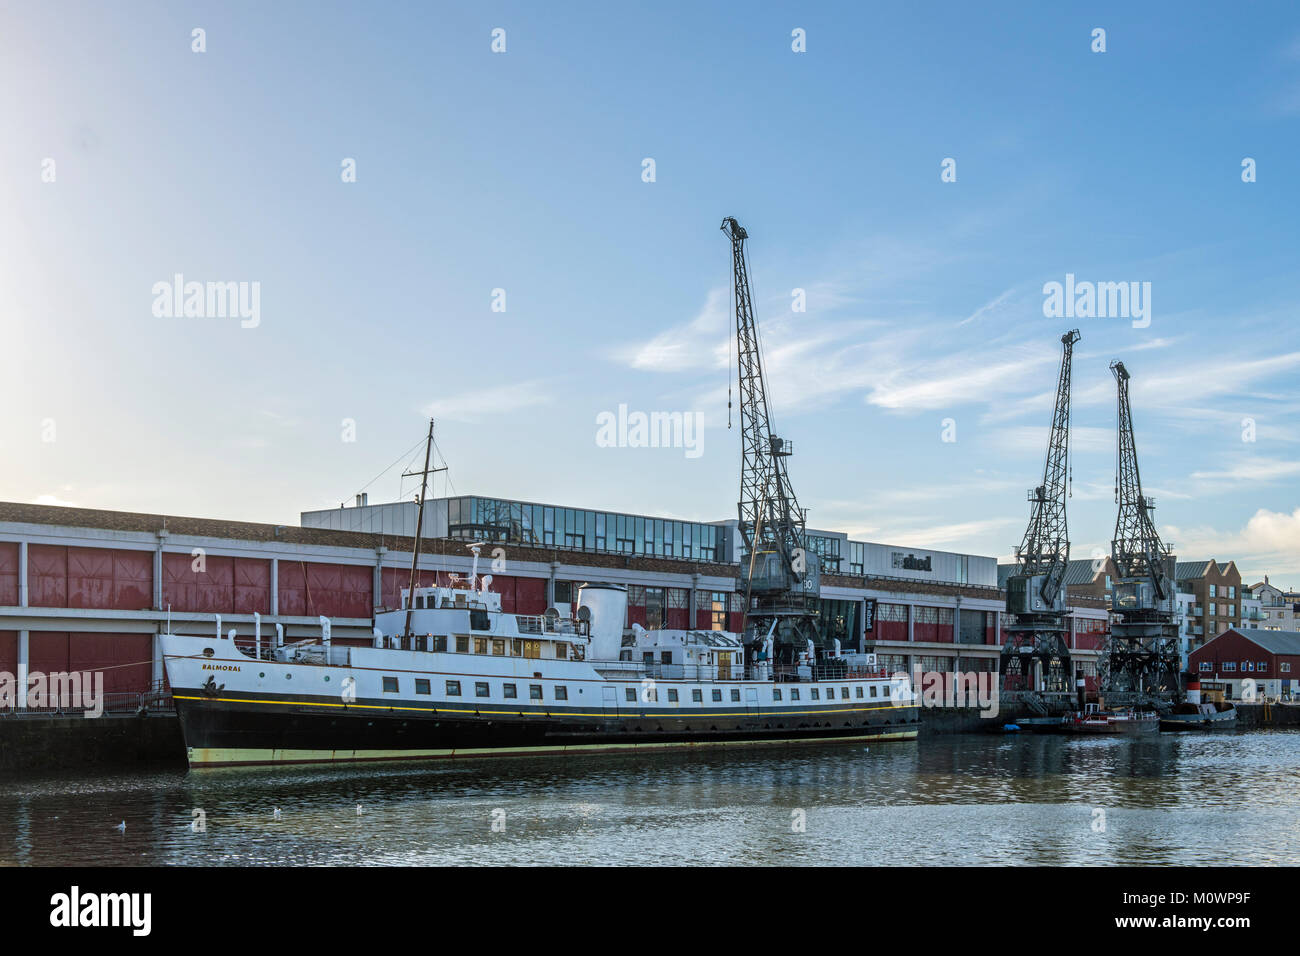 The MV Balmoral moored up in Bristol Harbour Stock Photo